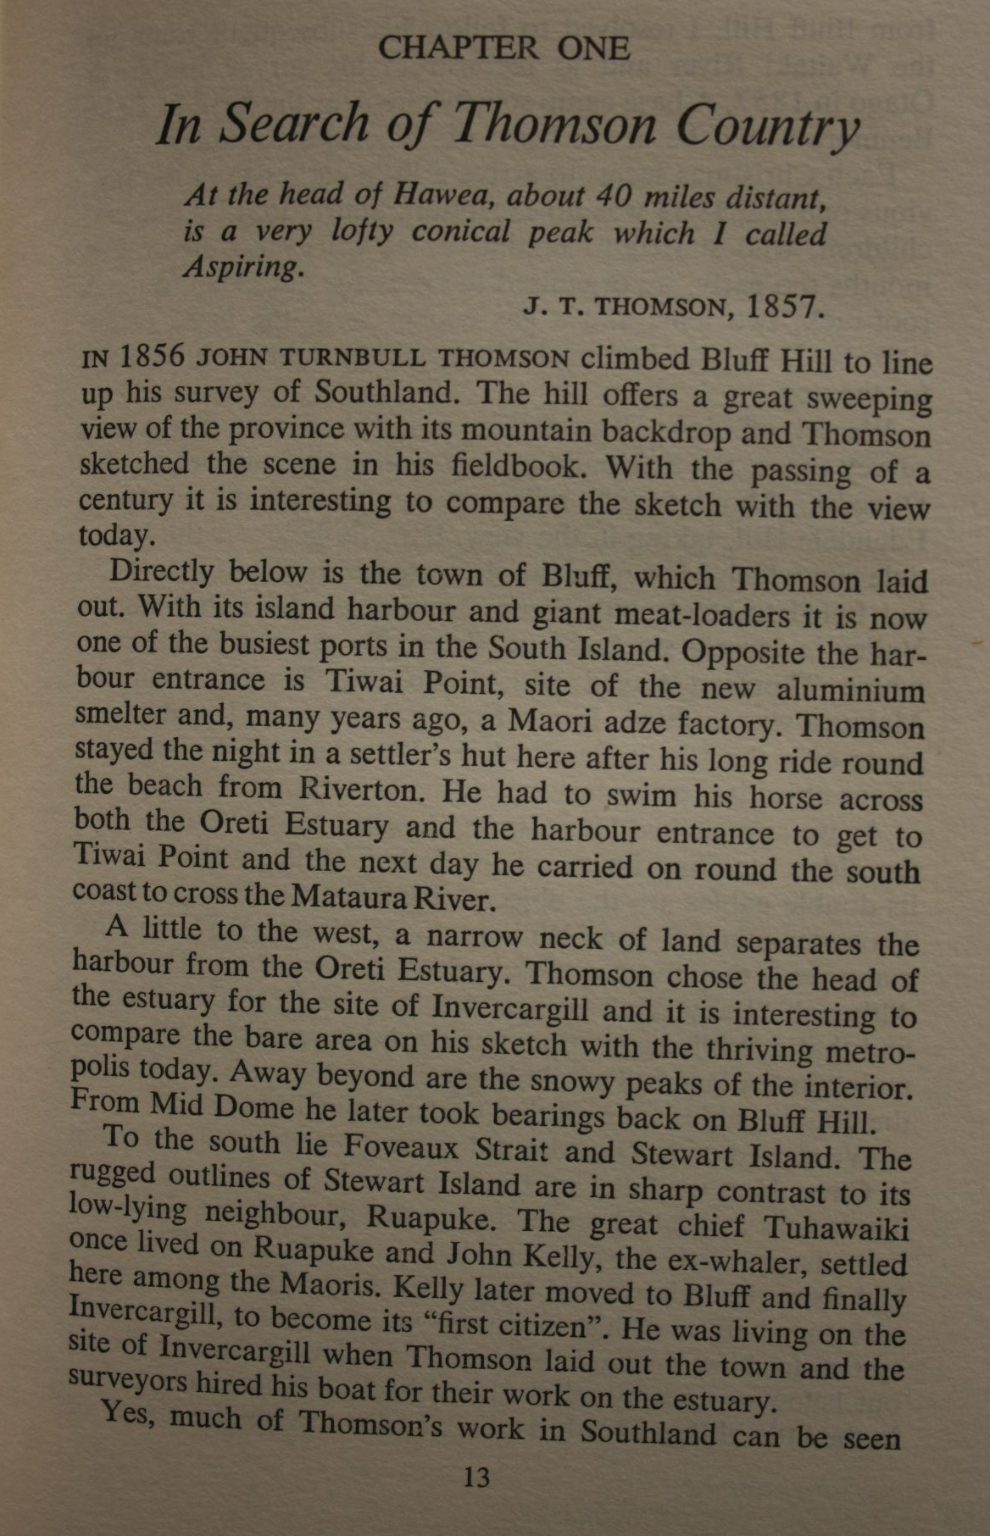 Mr. Surveyor Thomson: Early Days in Otago and Southland by John Hall-Jones.